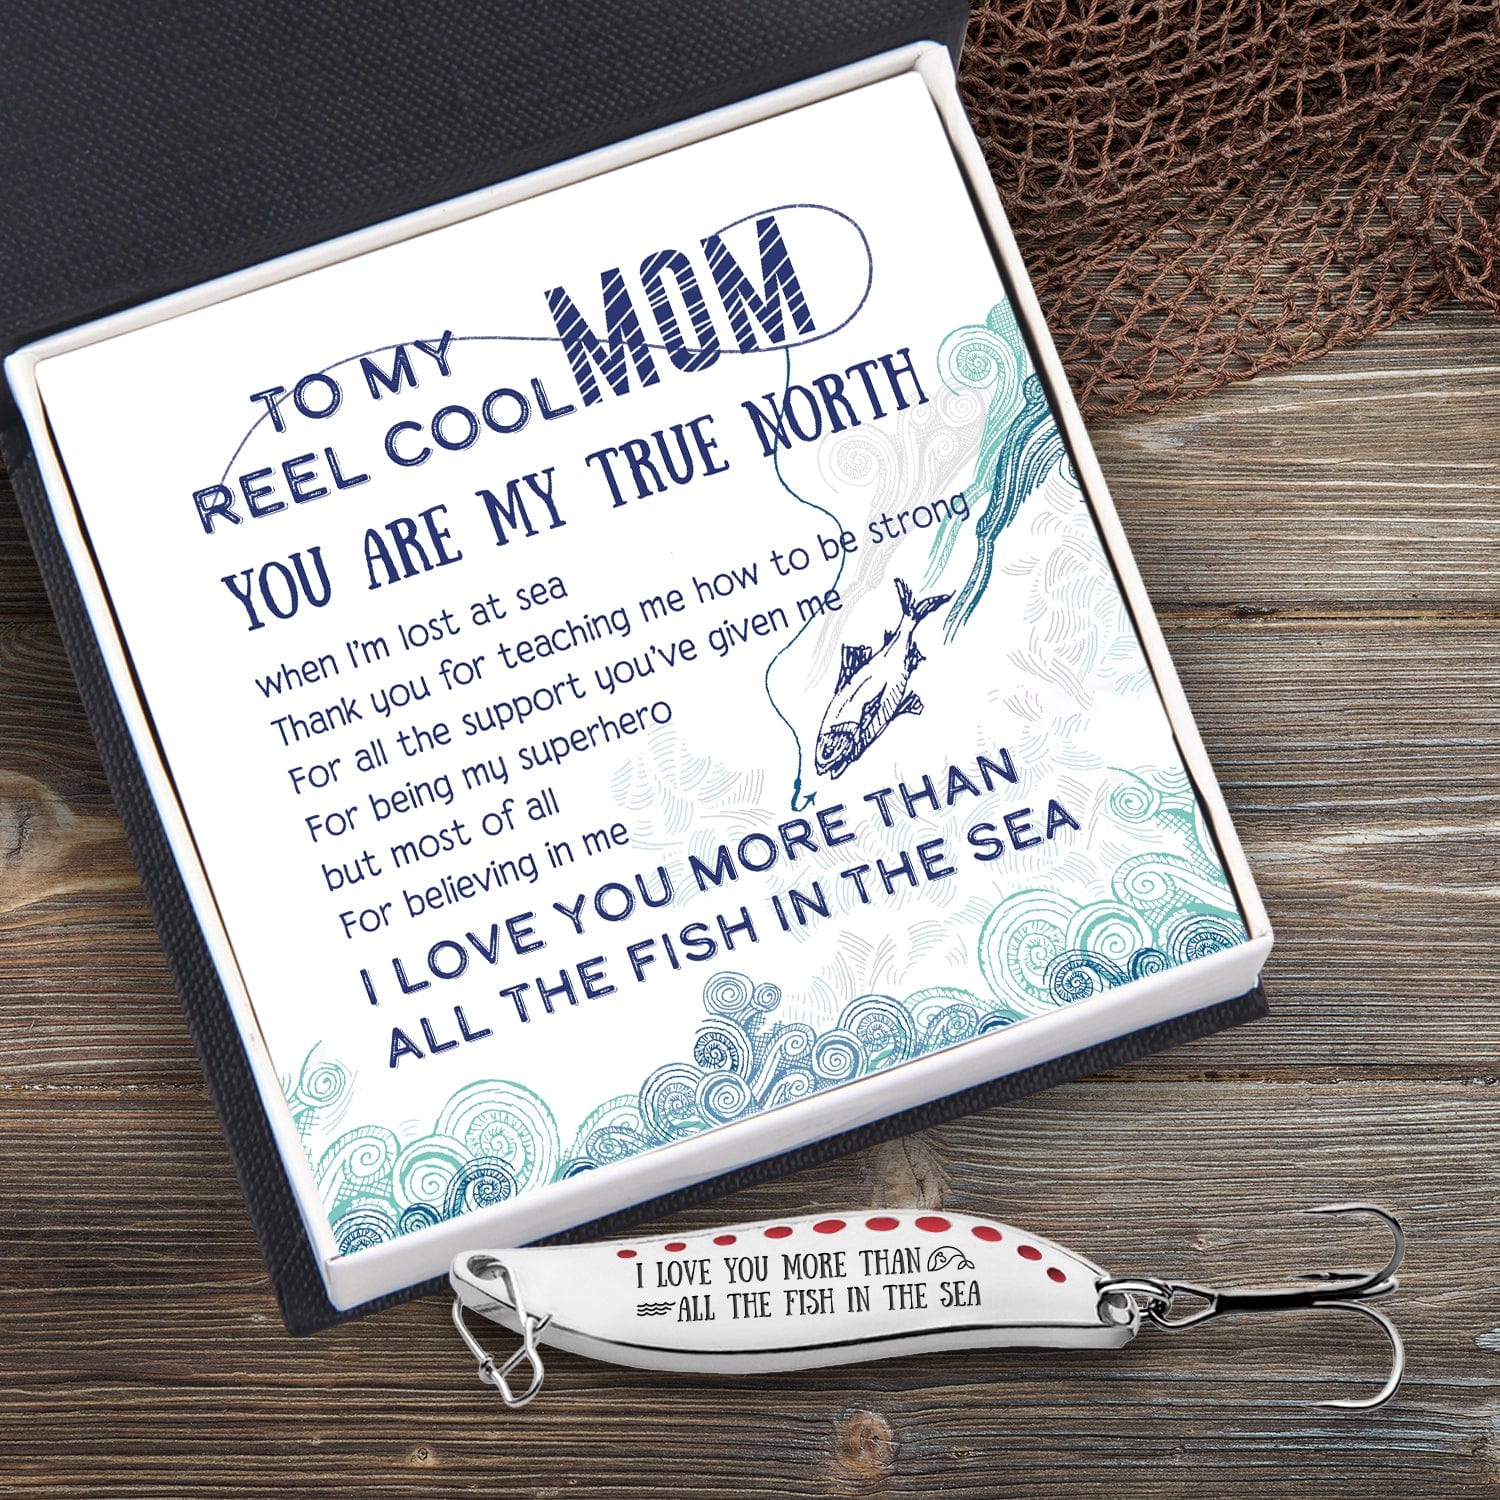 Fishing Lures - Fishing - To My Mom - You're My First Reel Love - Gfaa19001